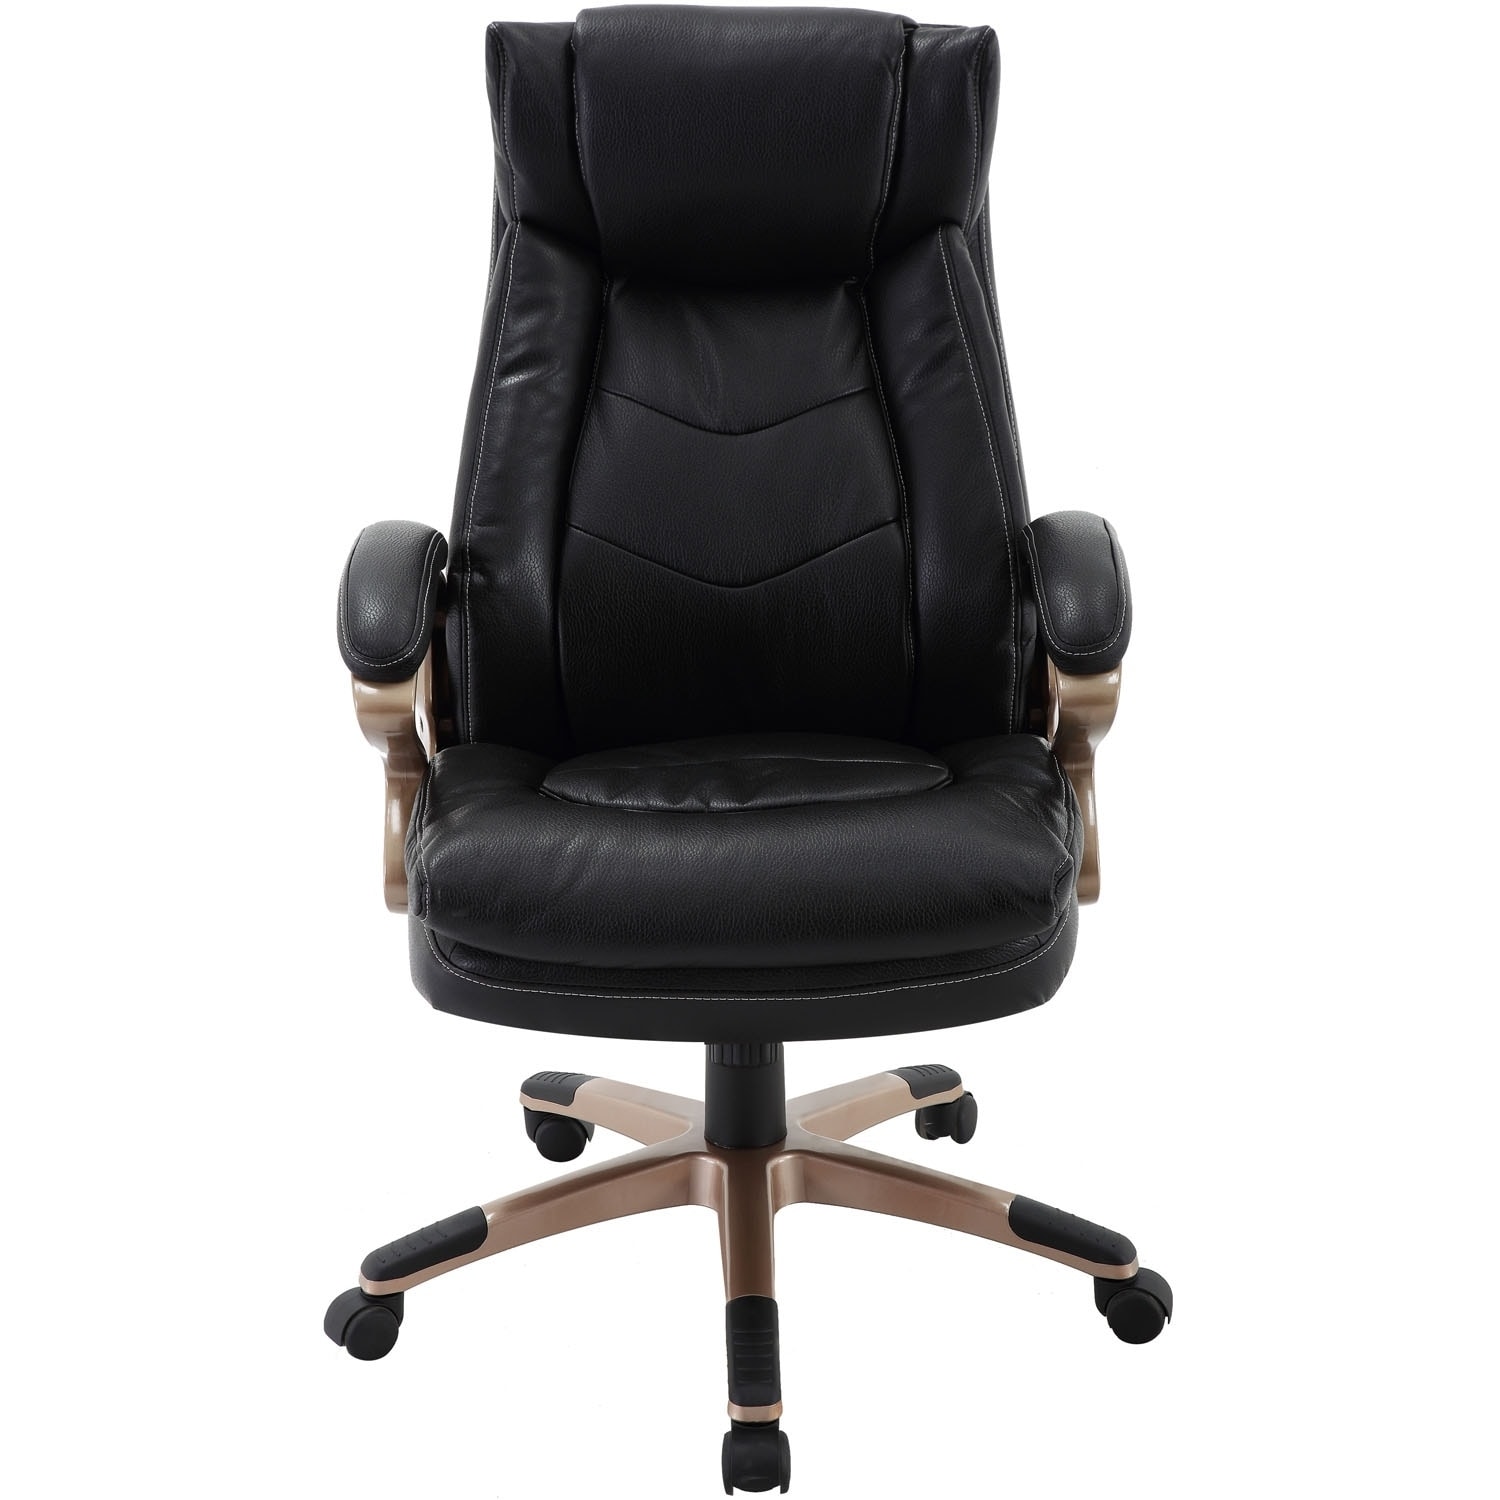 Hanover Atlas Executive Office Chair with Upholstered Faux-Leather Seat in Black and Copper-Wheeled Base